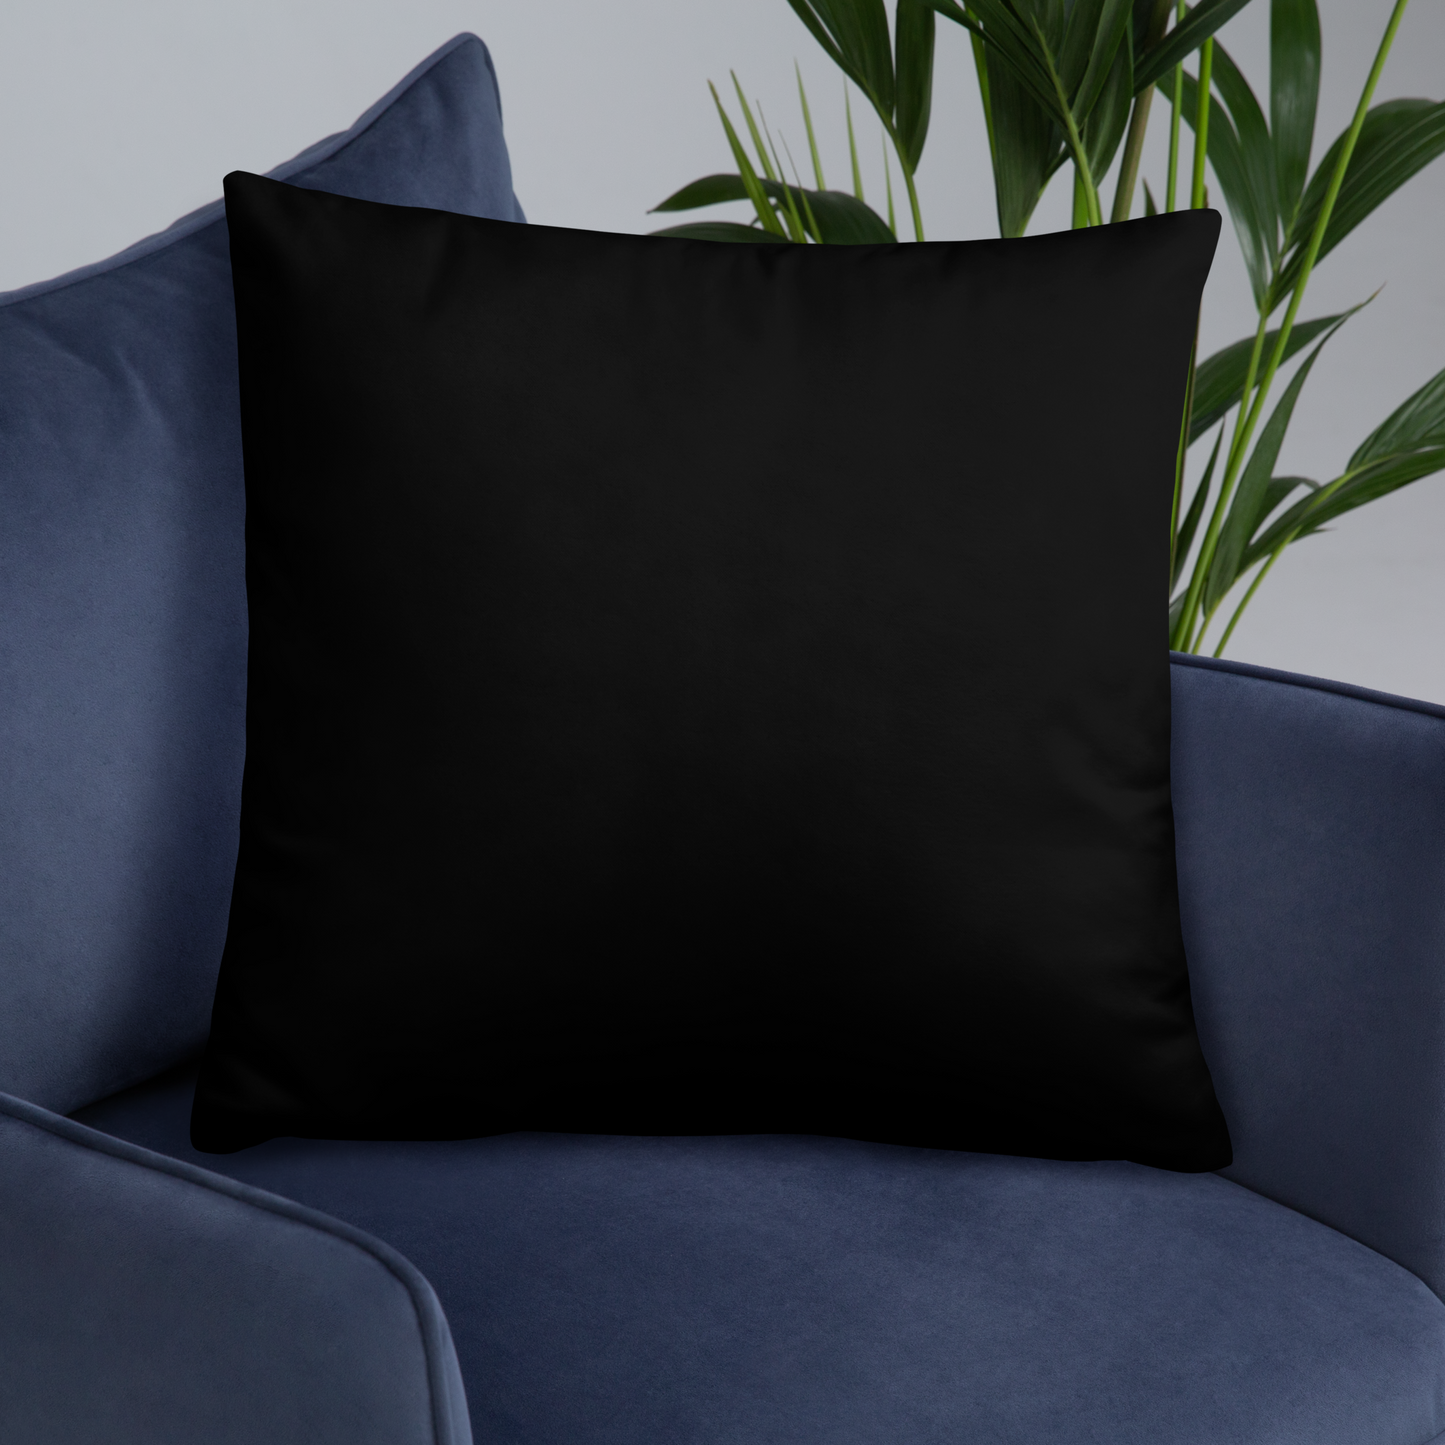 Pillow that Lives in a Style